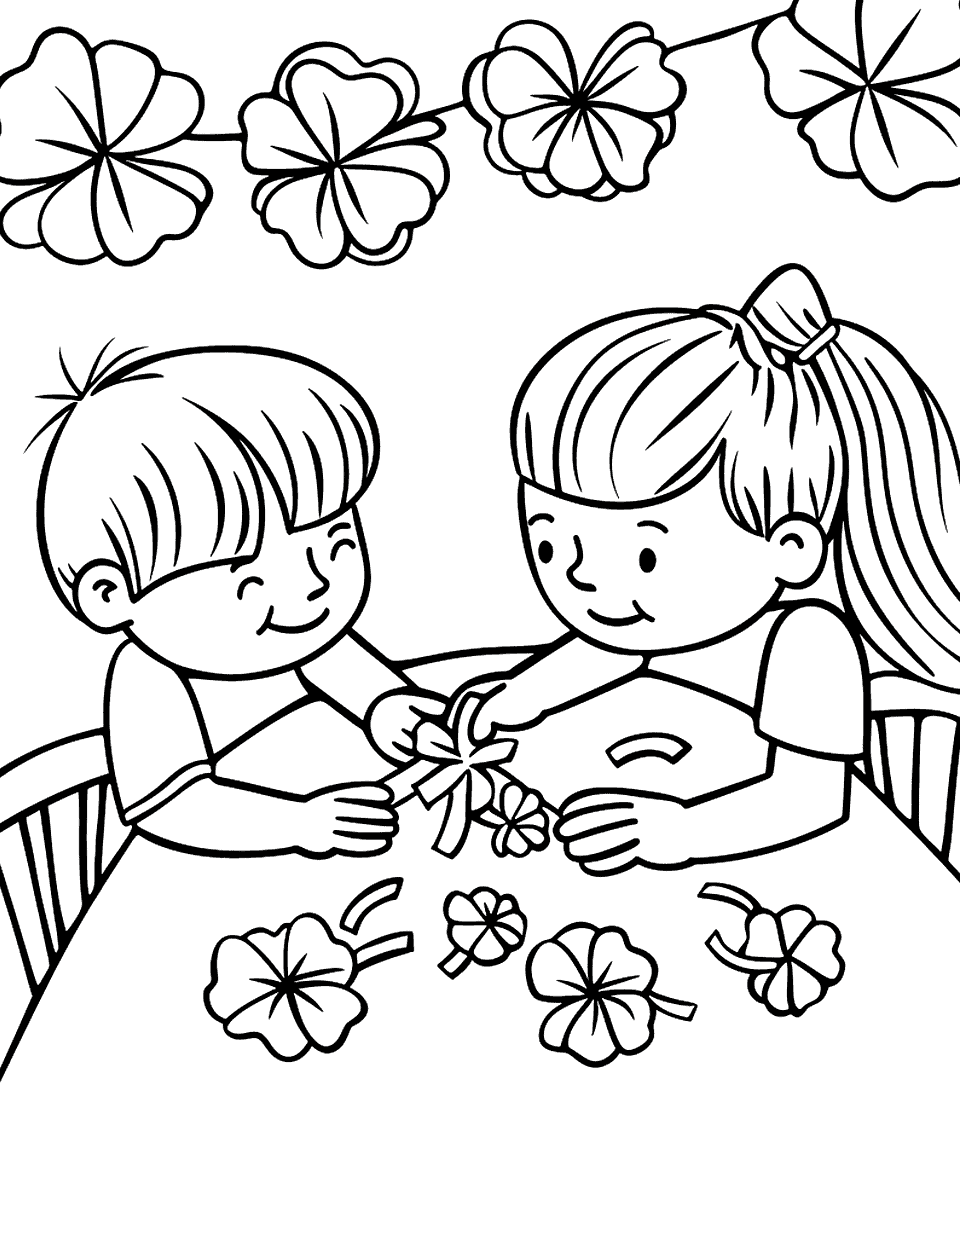 Children Making Shamrock Art Coloring Page - Kids sitting around a table, crafting shamrock-shaped decorations from paper.